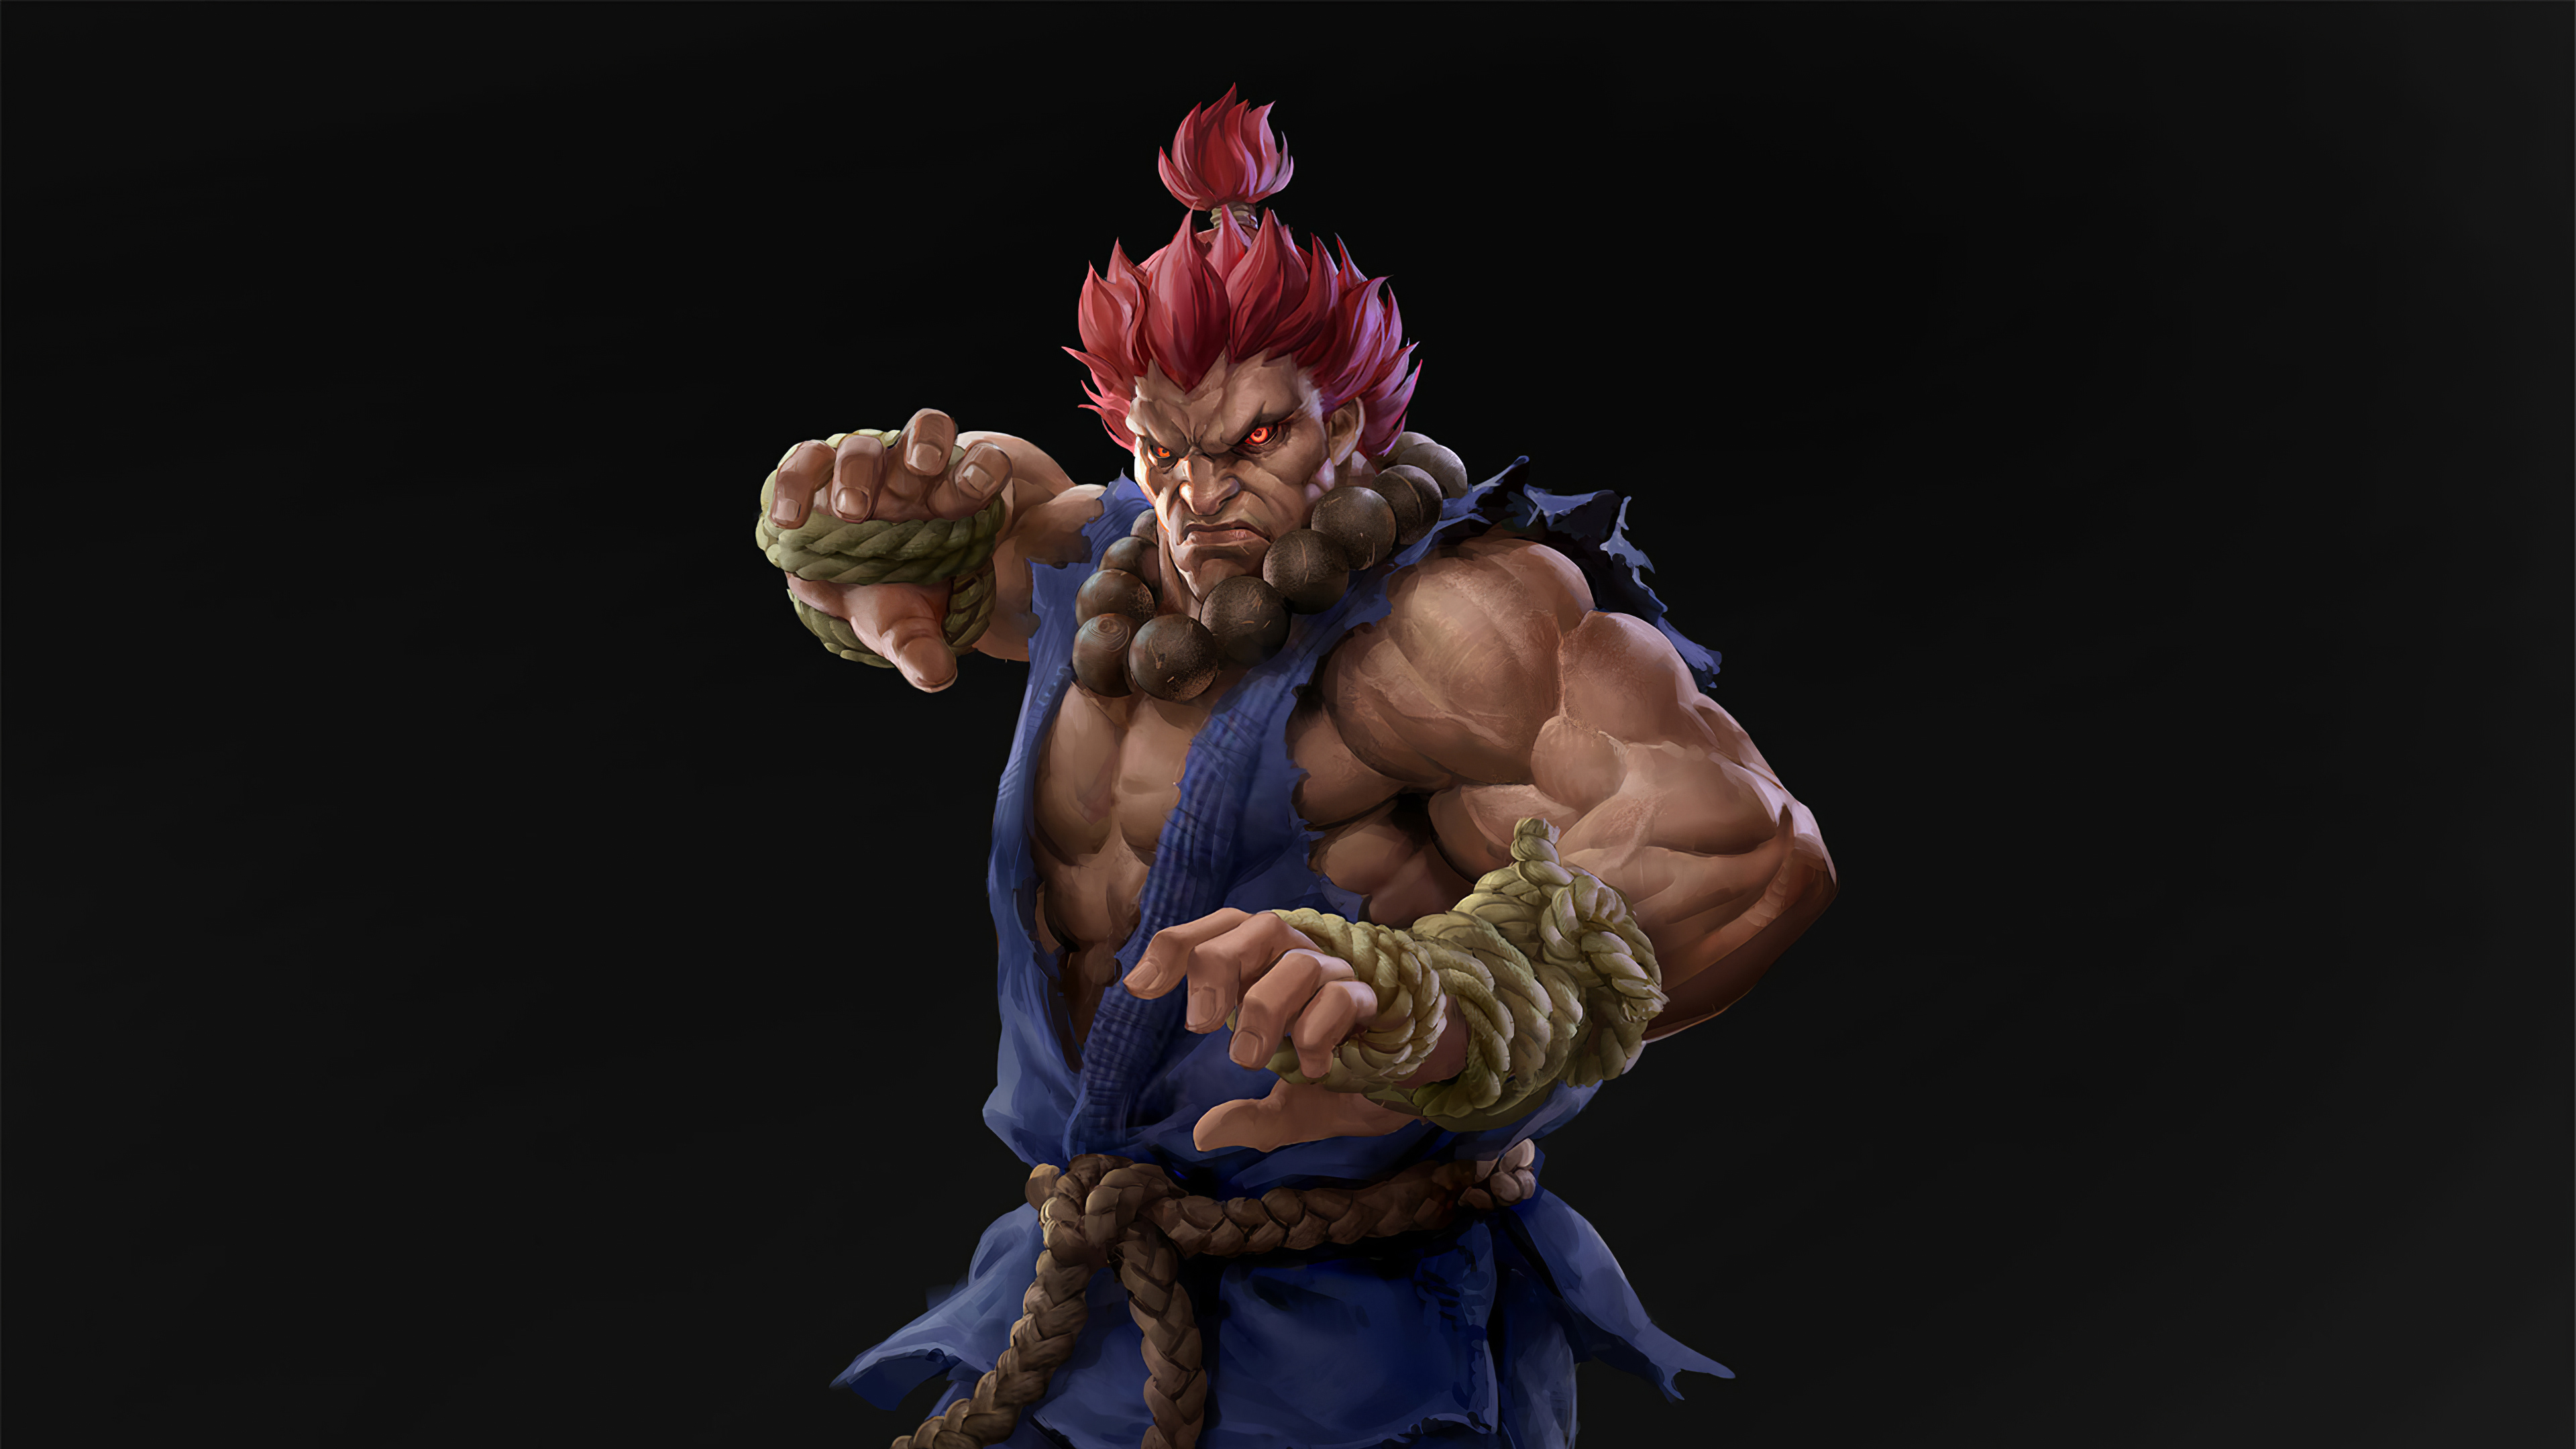 2880x1800 4k Akuma Street Fighter Artwork Macbook Pro Retina Hd 4k Wallpapers Images Backgrounds Photos And Pictures